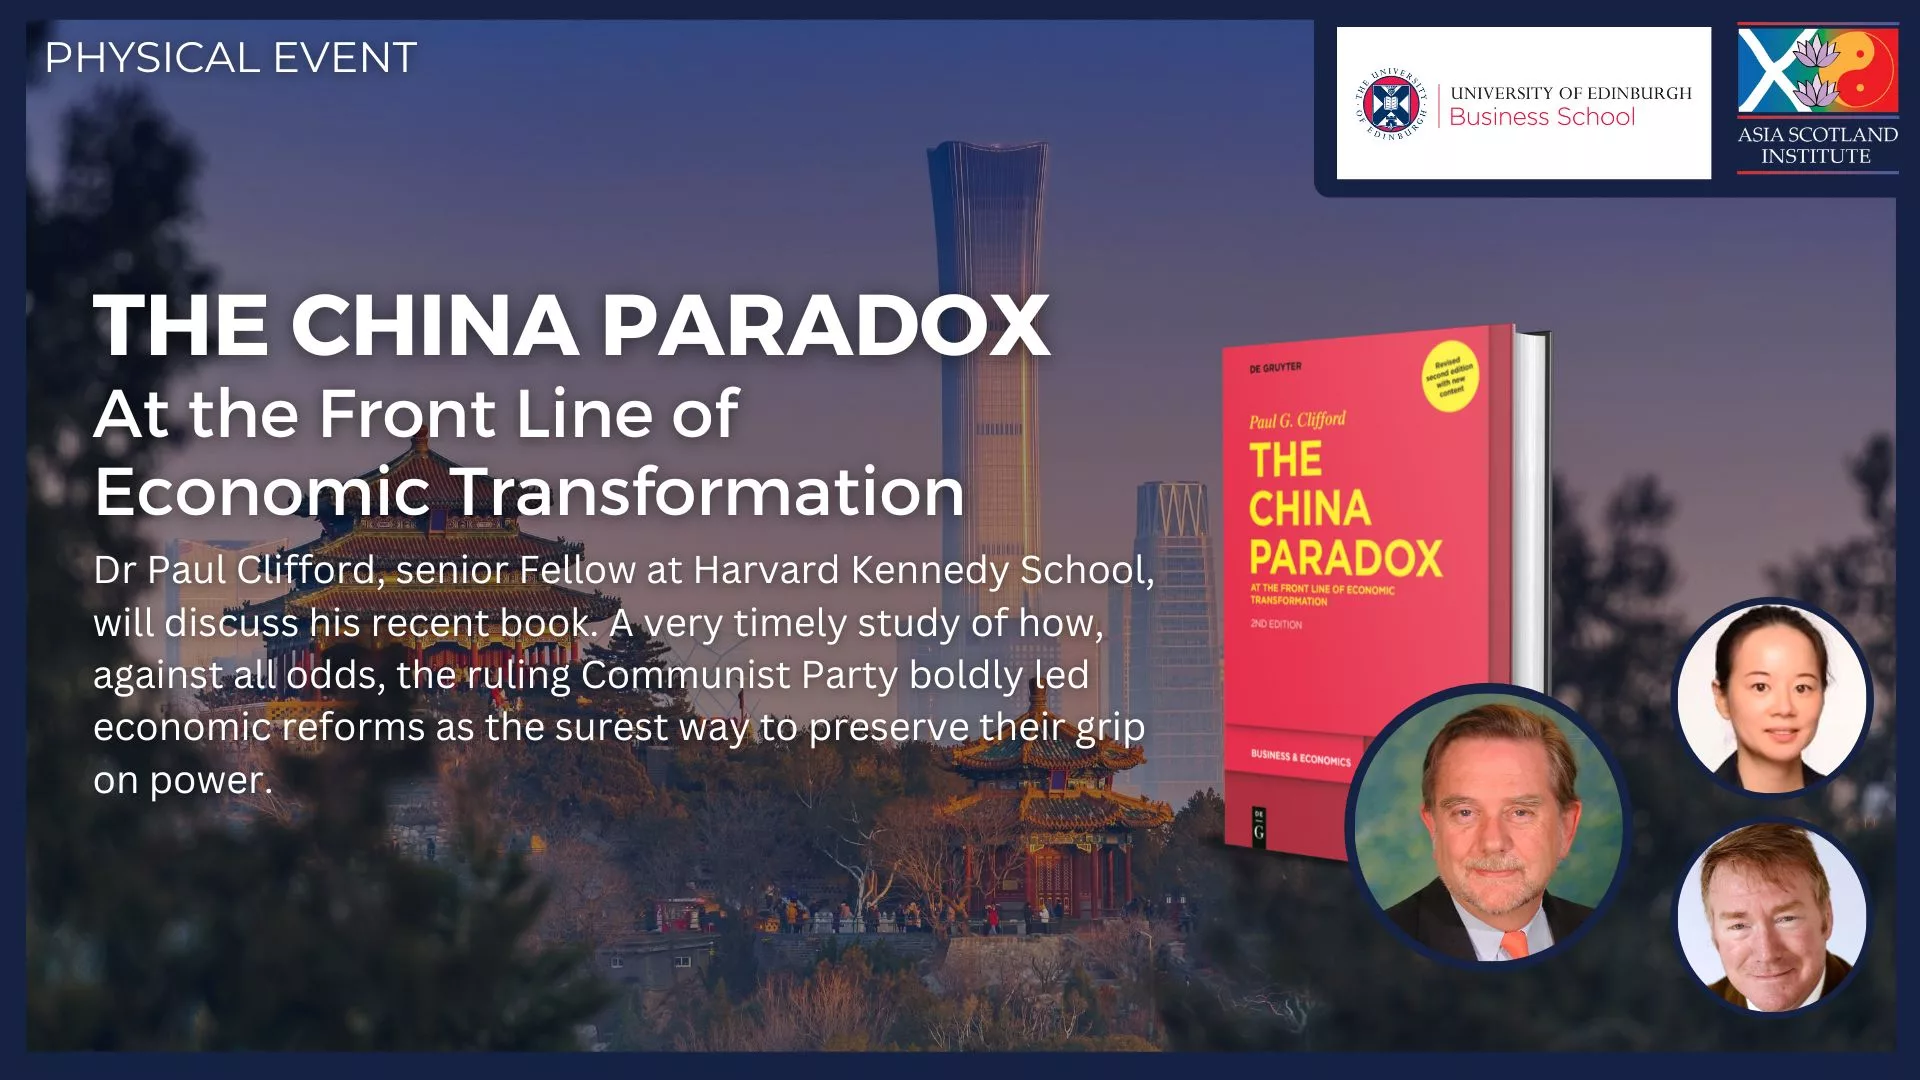 THE CHINA PARADOX At the Front Line of Economic Transformation 1920 × 1080 px jpg